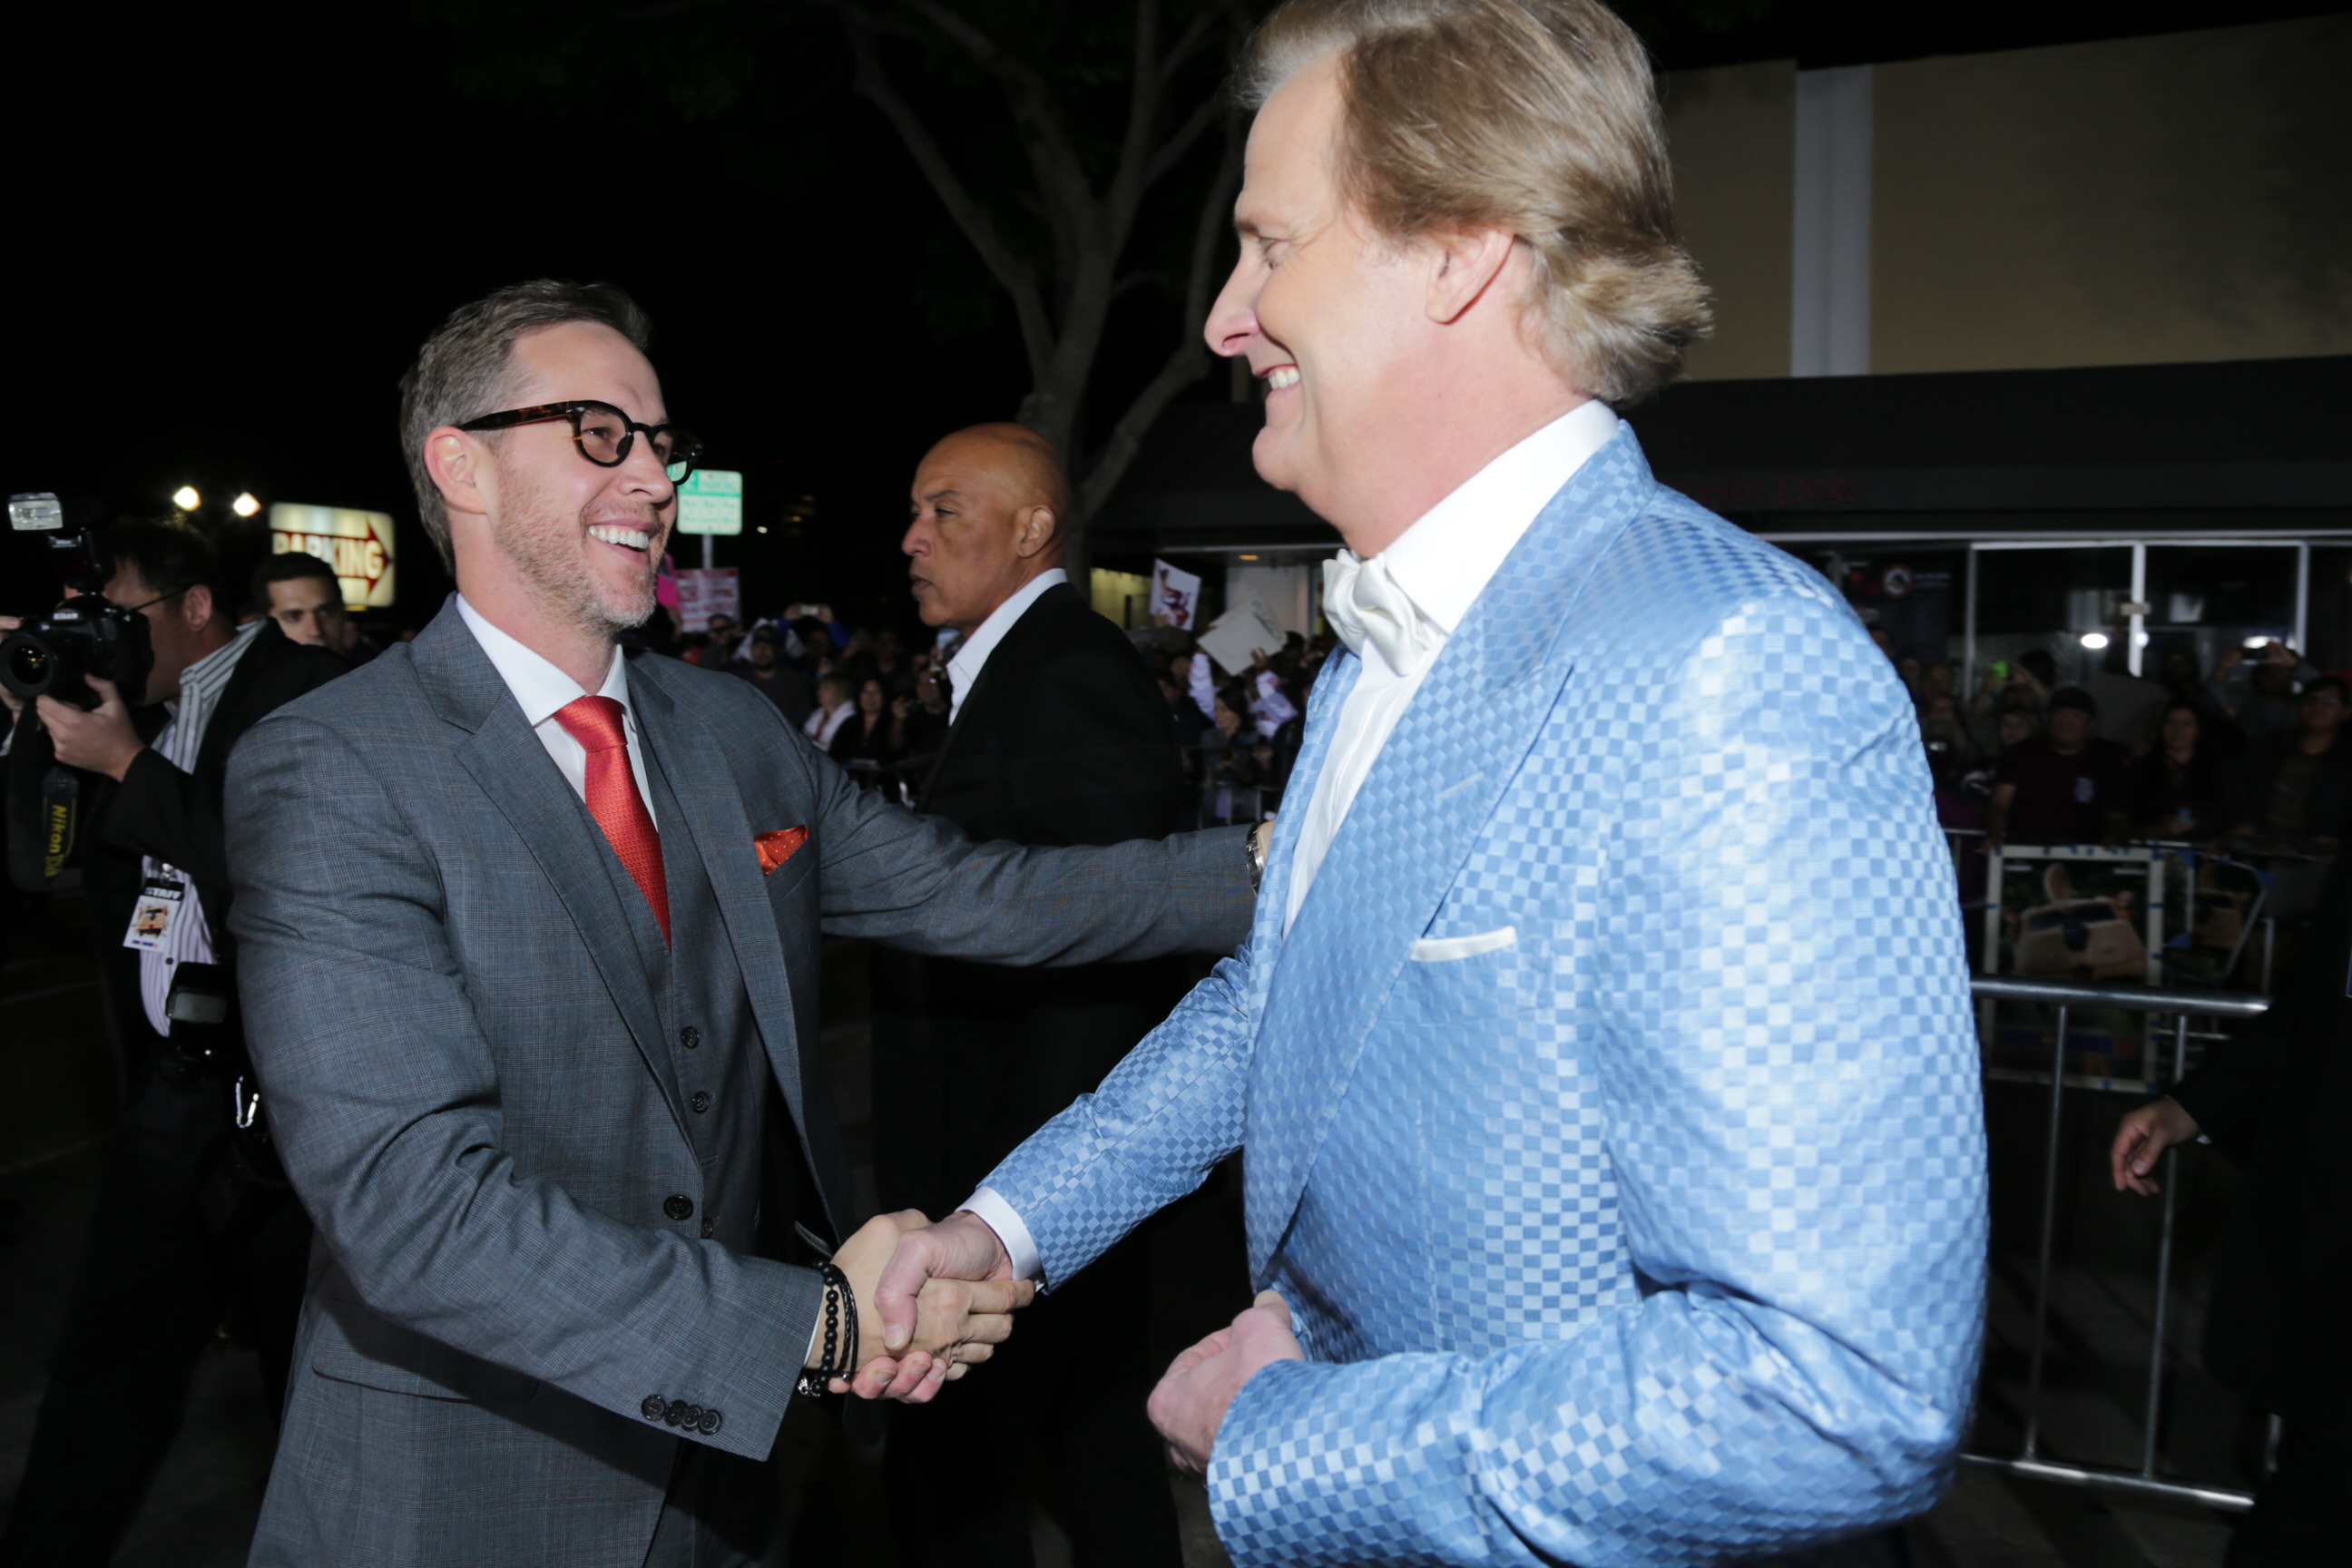 Joey McFarland with Jeff Daniels at the Dumb and Dumber To Premiere in Los Angeles.